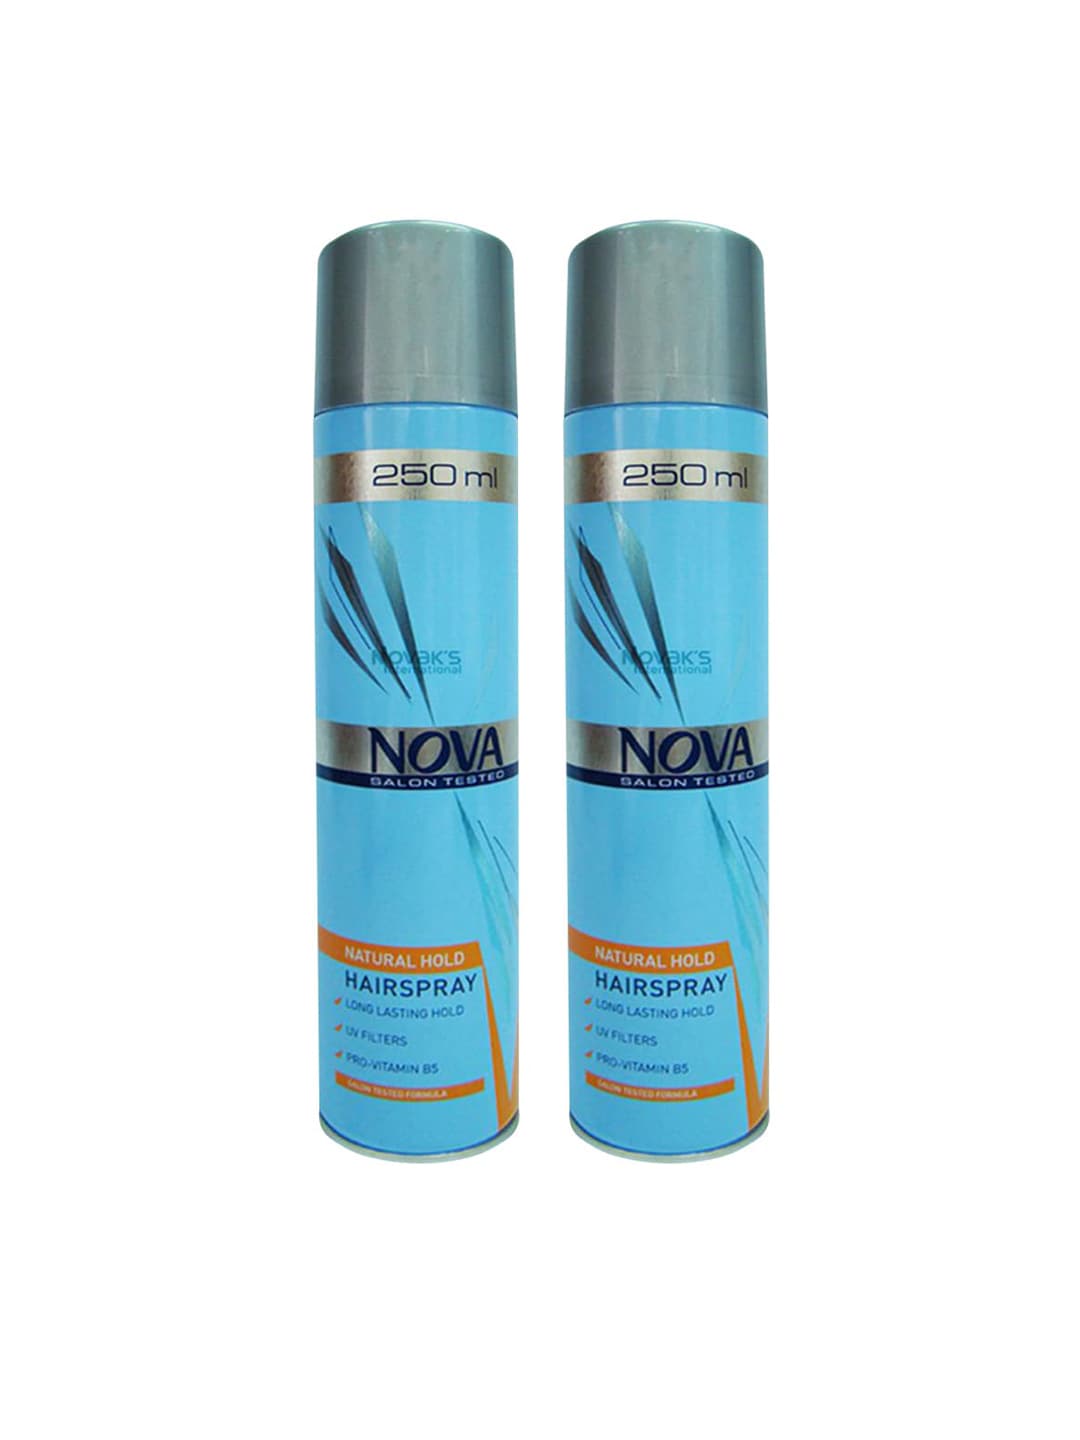 NOVA Blue Natural Hold Hair Spray, 250ml (Pack of 2) Price in India